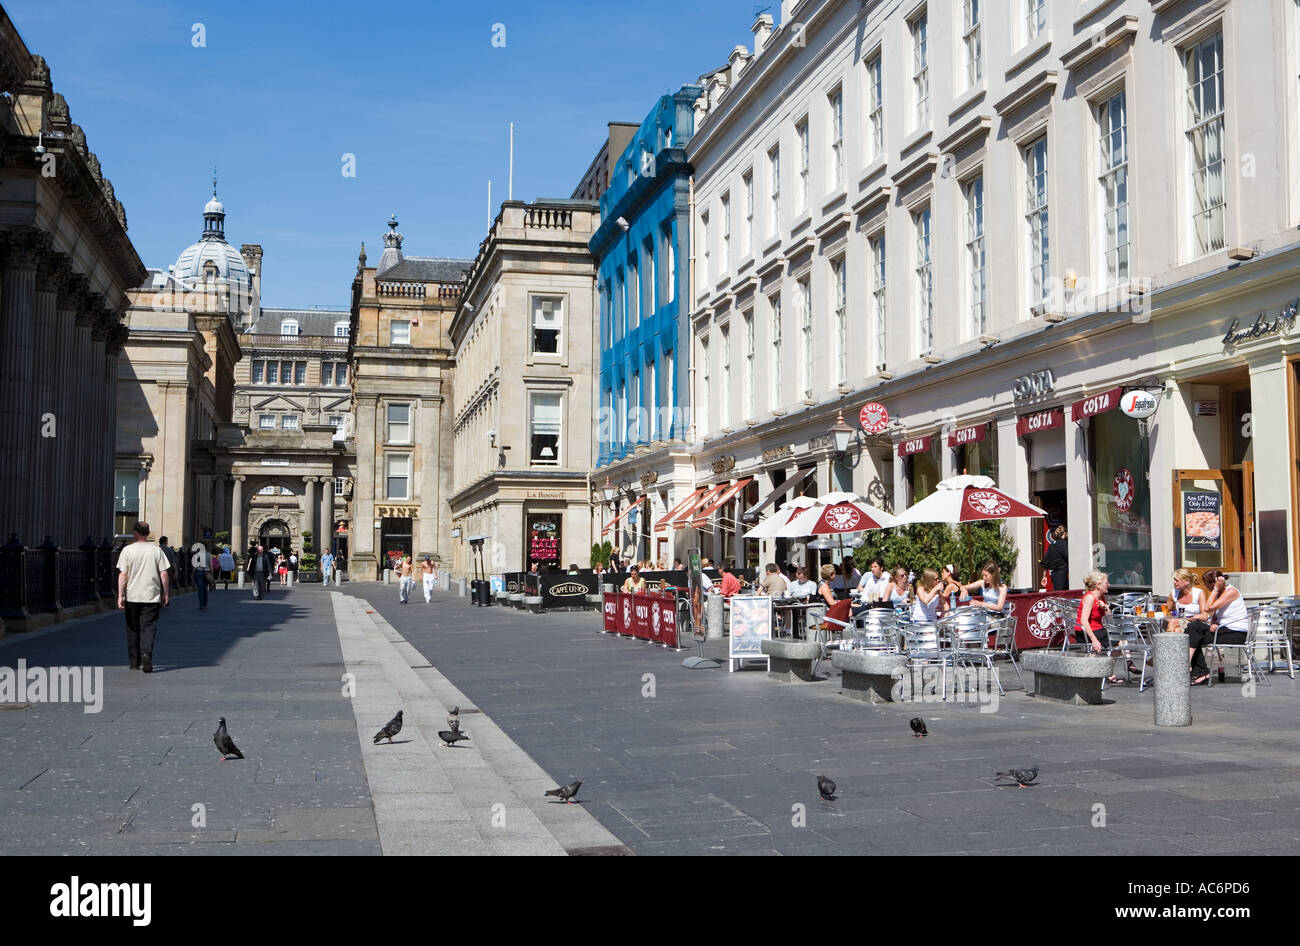 CAFE CULTURE IN ROYAL EXCHANGE SQUARE GLASGOW Stock Photo